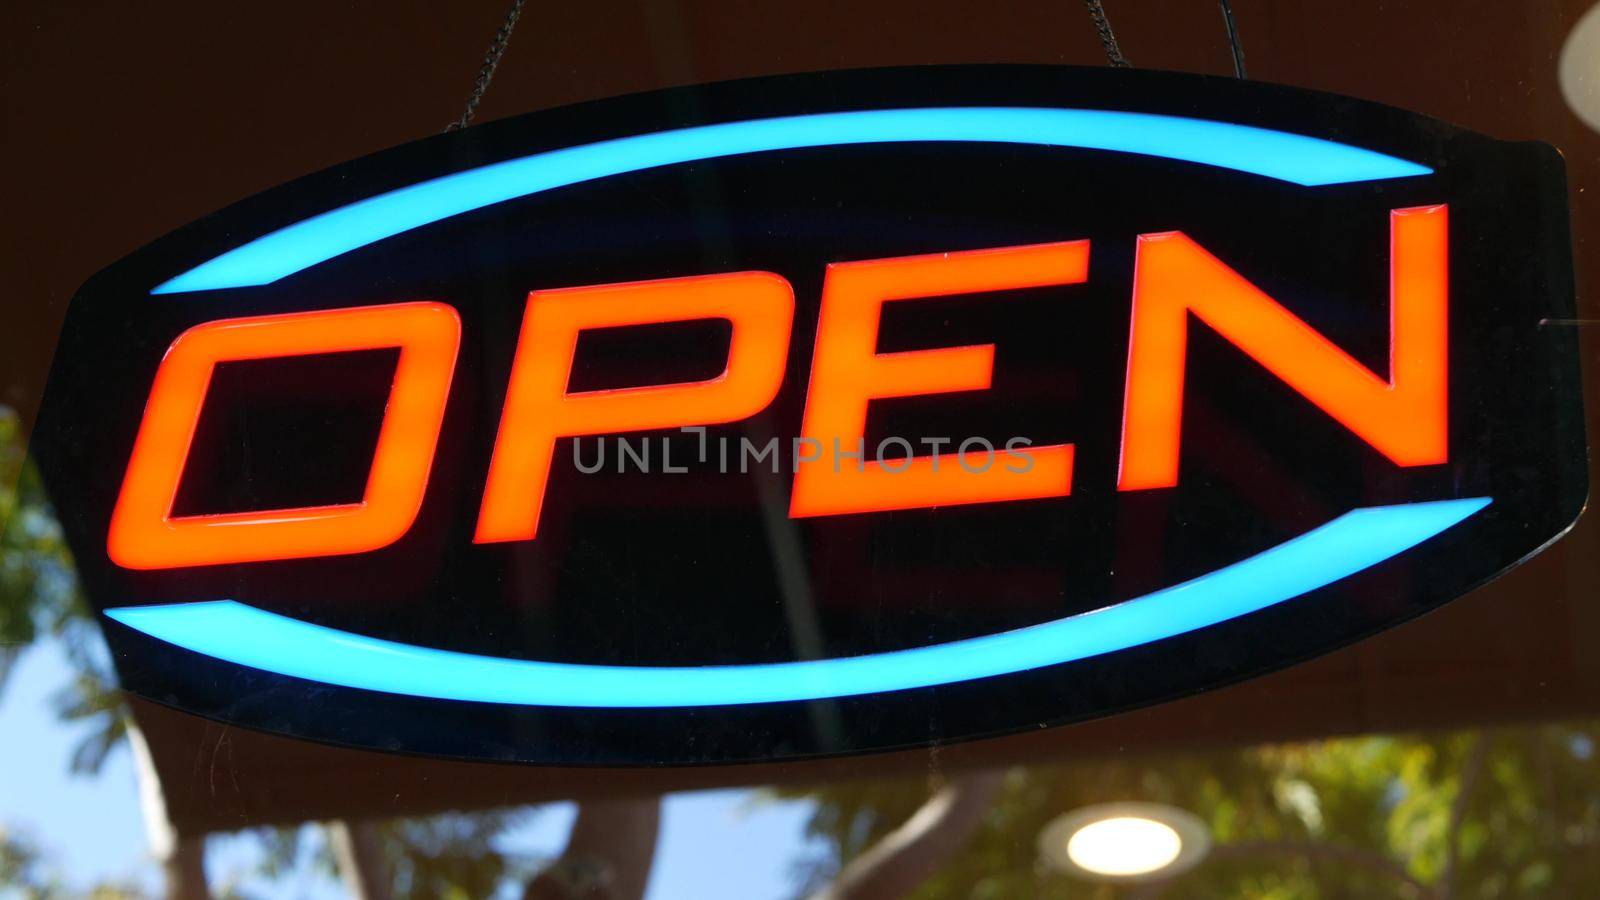 Open neon sign glowing in the dark. Vivid retro styled text at entrance on glass window. Colorful electric banner selective focus close up. Light bulbs radiance at night. Shiny illuminated lettering by DogoraSun